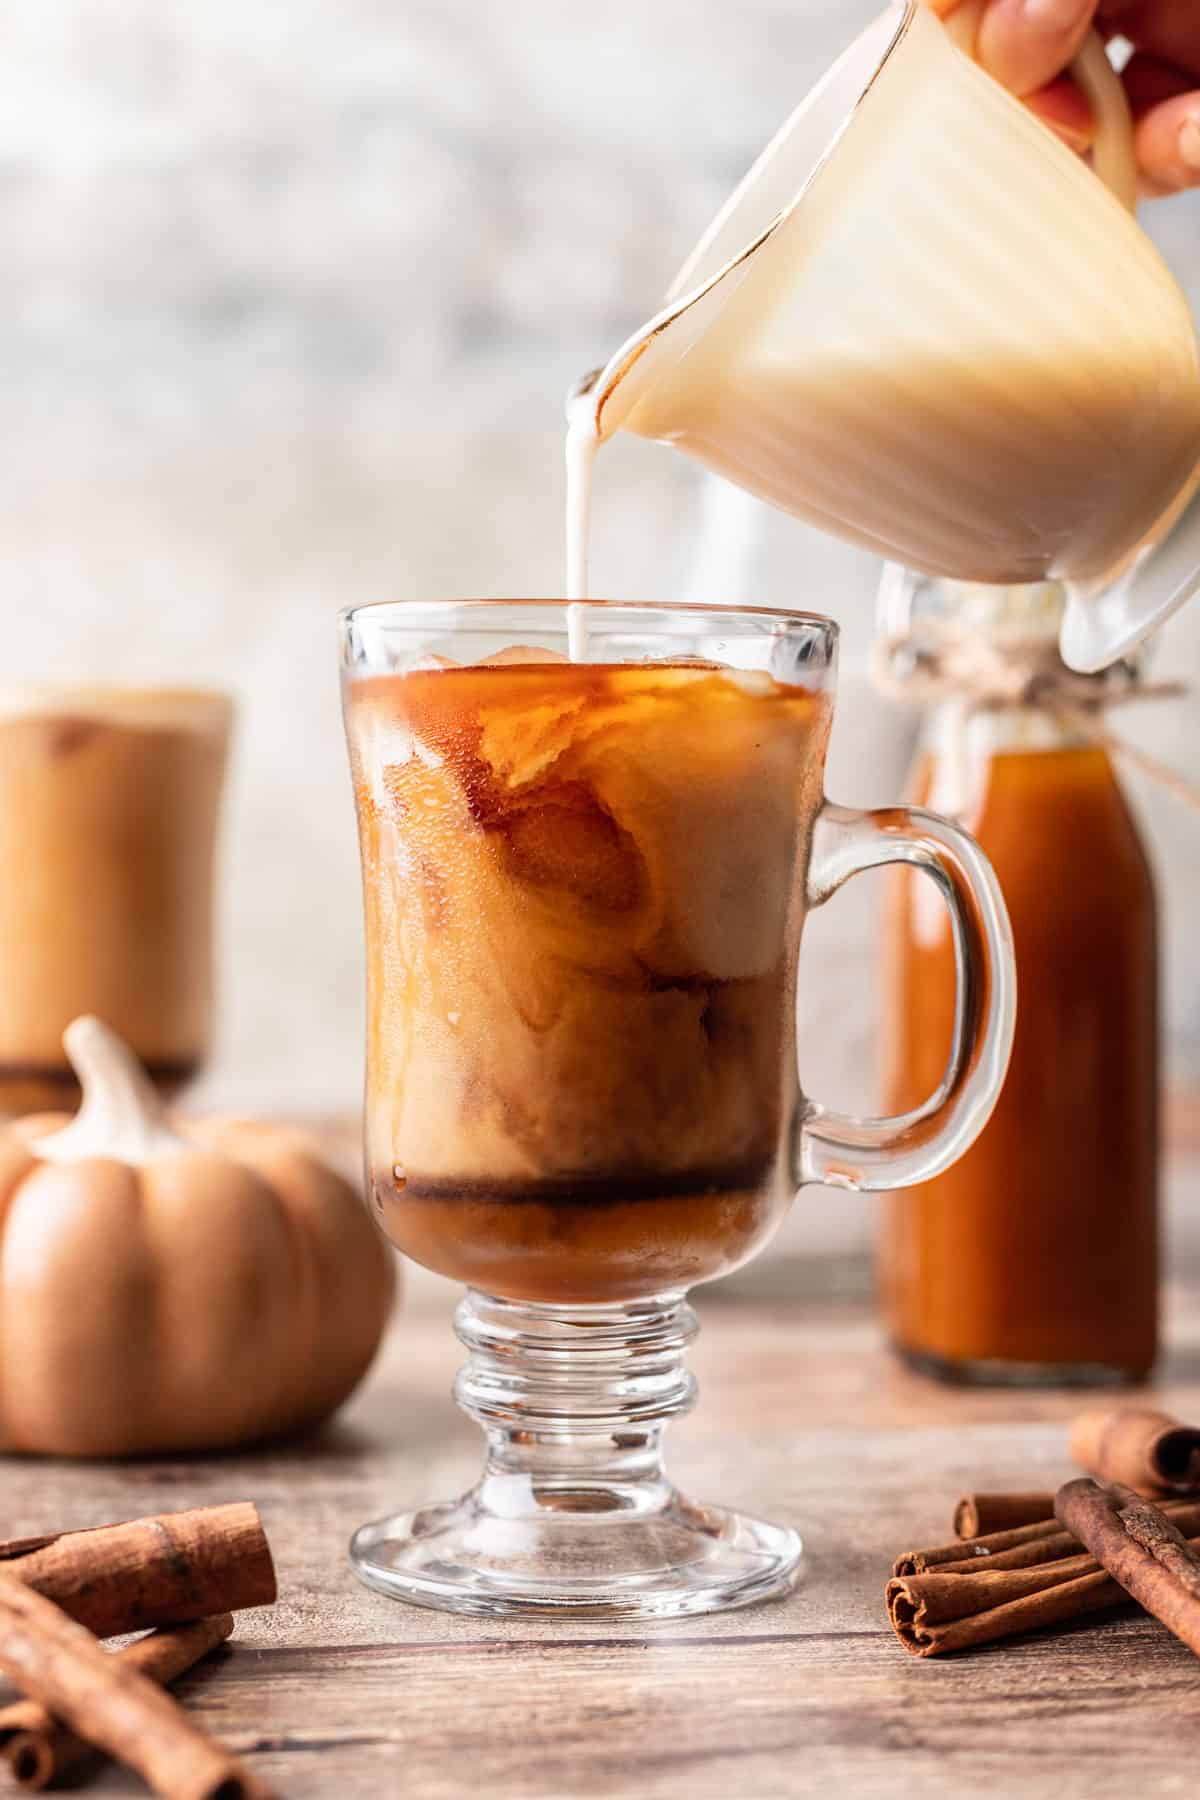 Pouring milk into an iced pumpkin spice coffee.